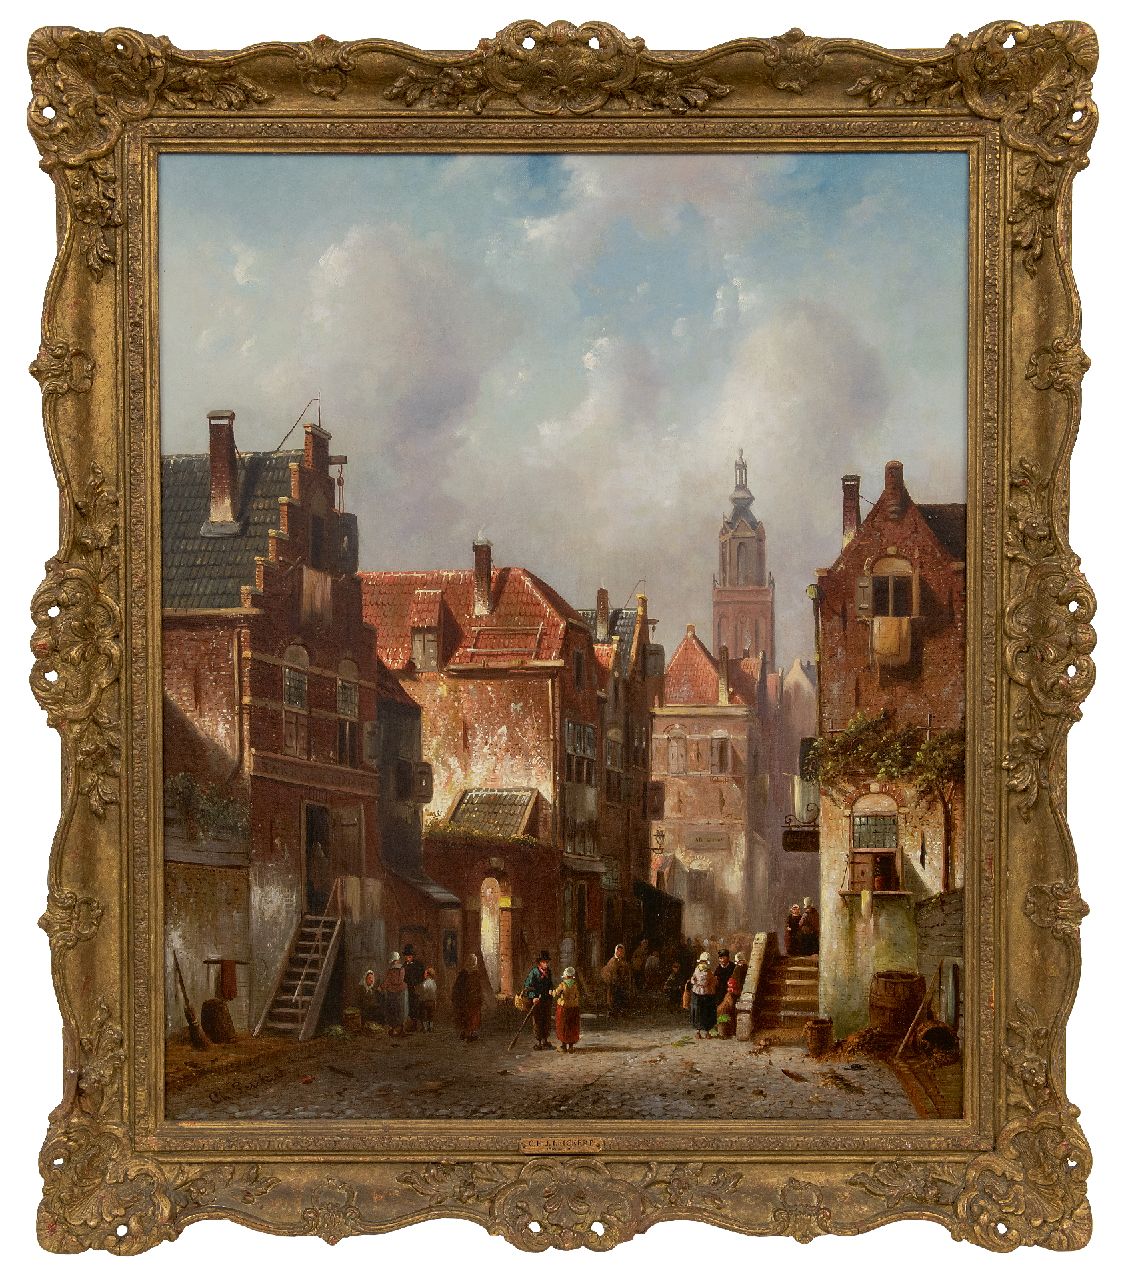 Leickert C.H.J.  | 'Charles' Henri Joseph Leickert | Paintings offered for sale | Market day in a Dutch town with left the Bank of Loan, oil on canvas 59.5 x 49.6 cm, signed l.l.